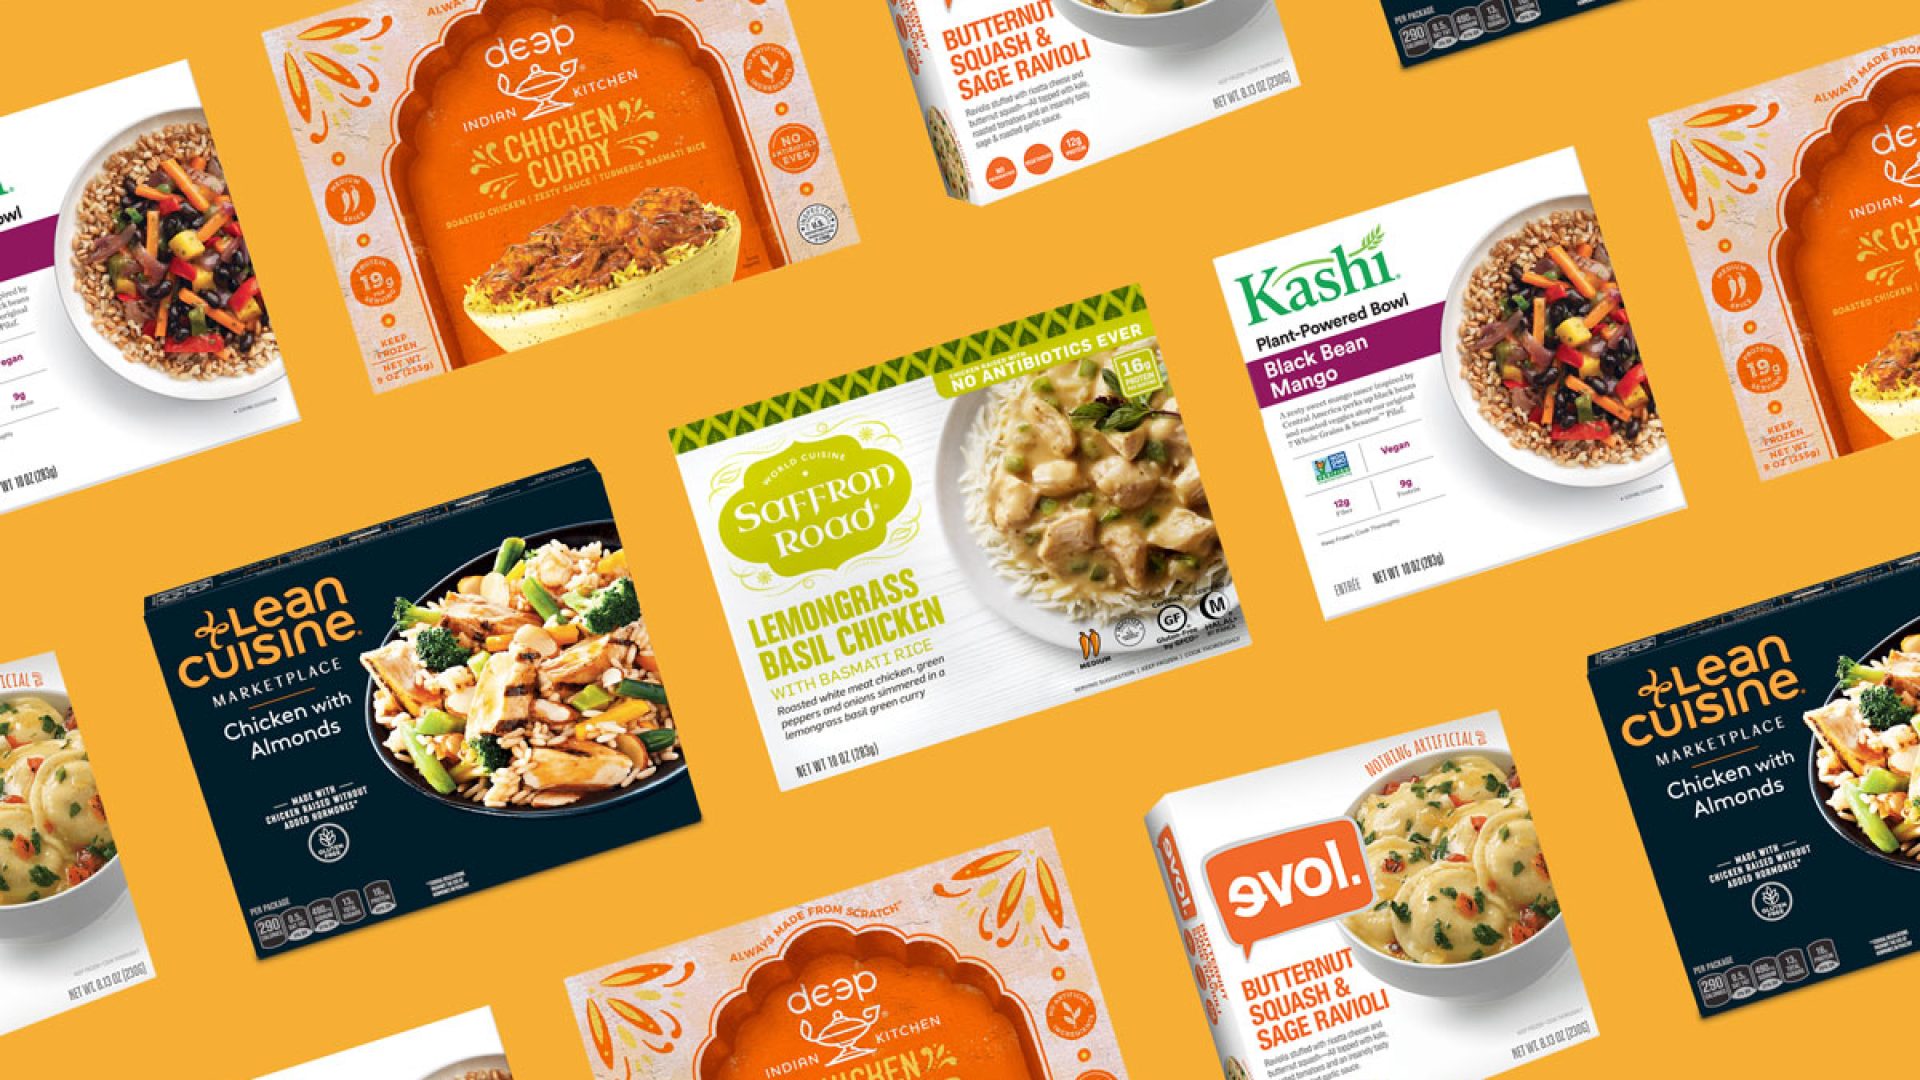 25 Best Frozen Dinners for Healthier Weeknights | Eat This Not That